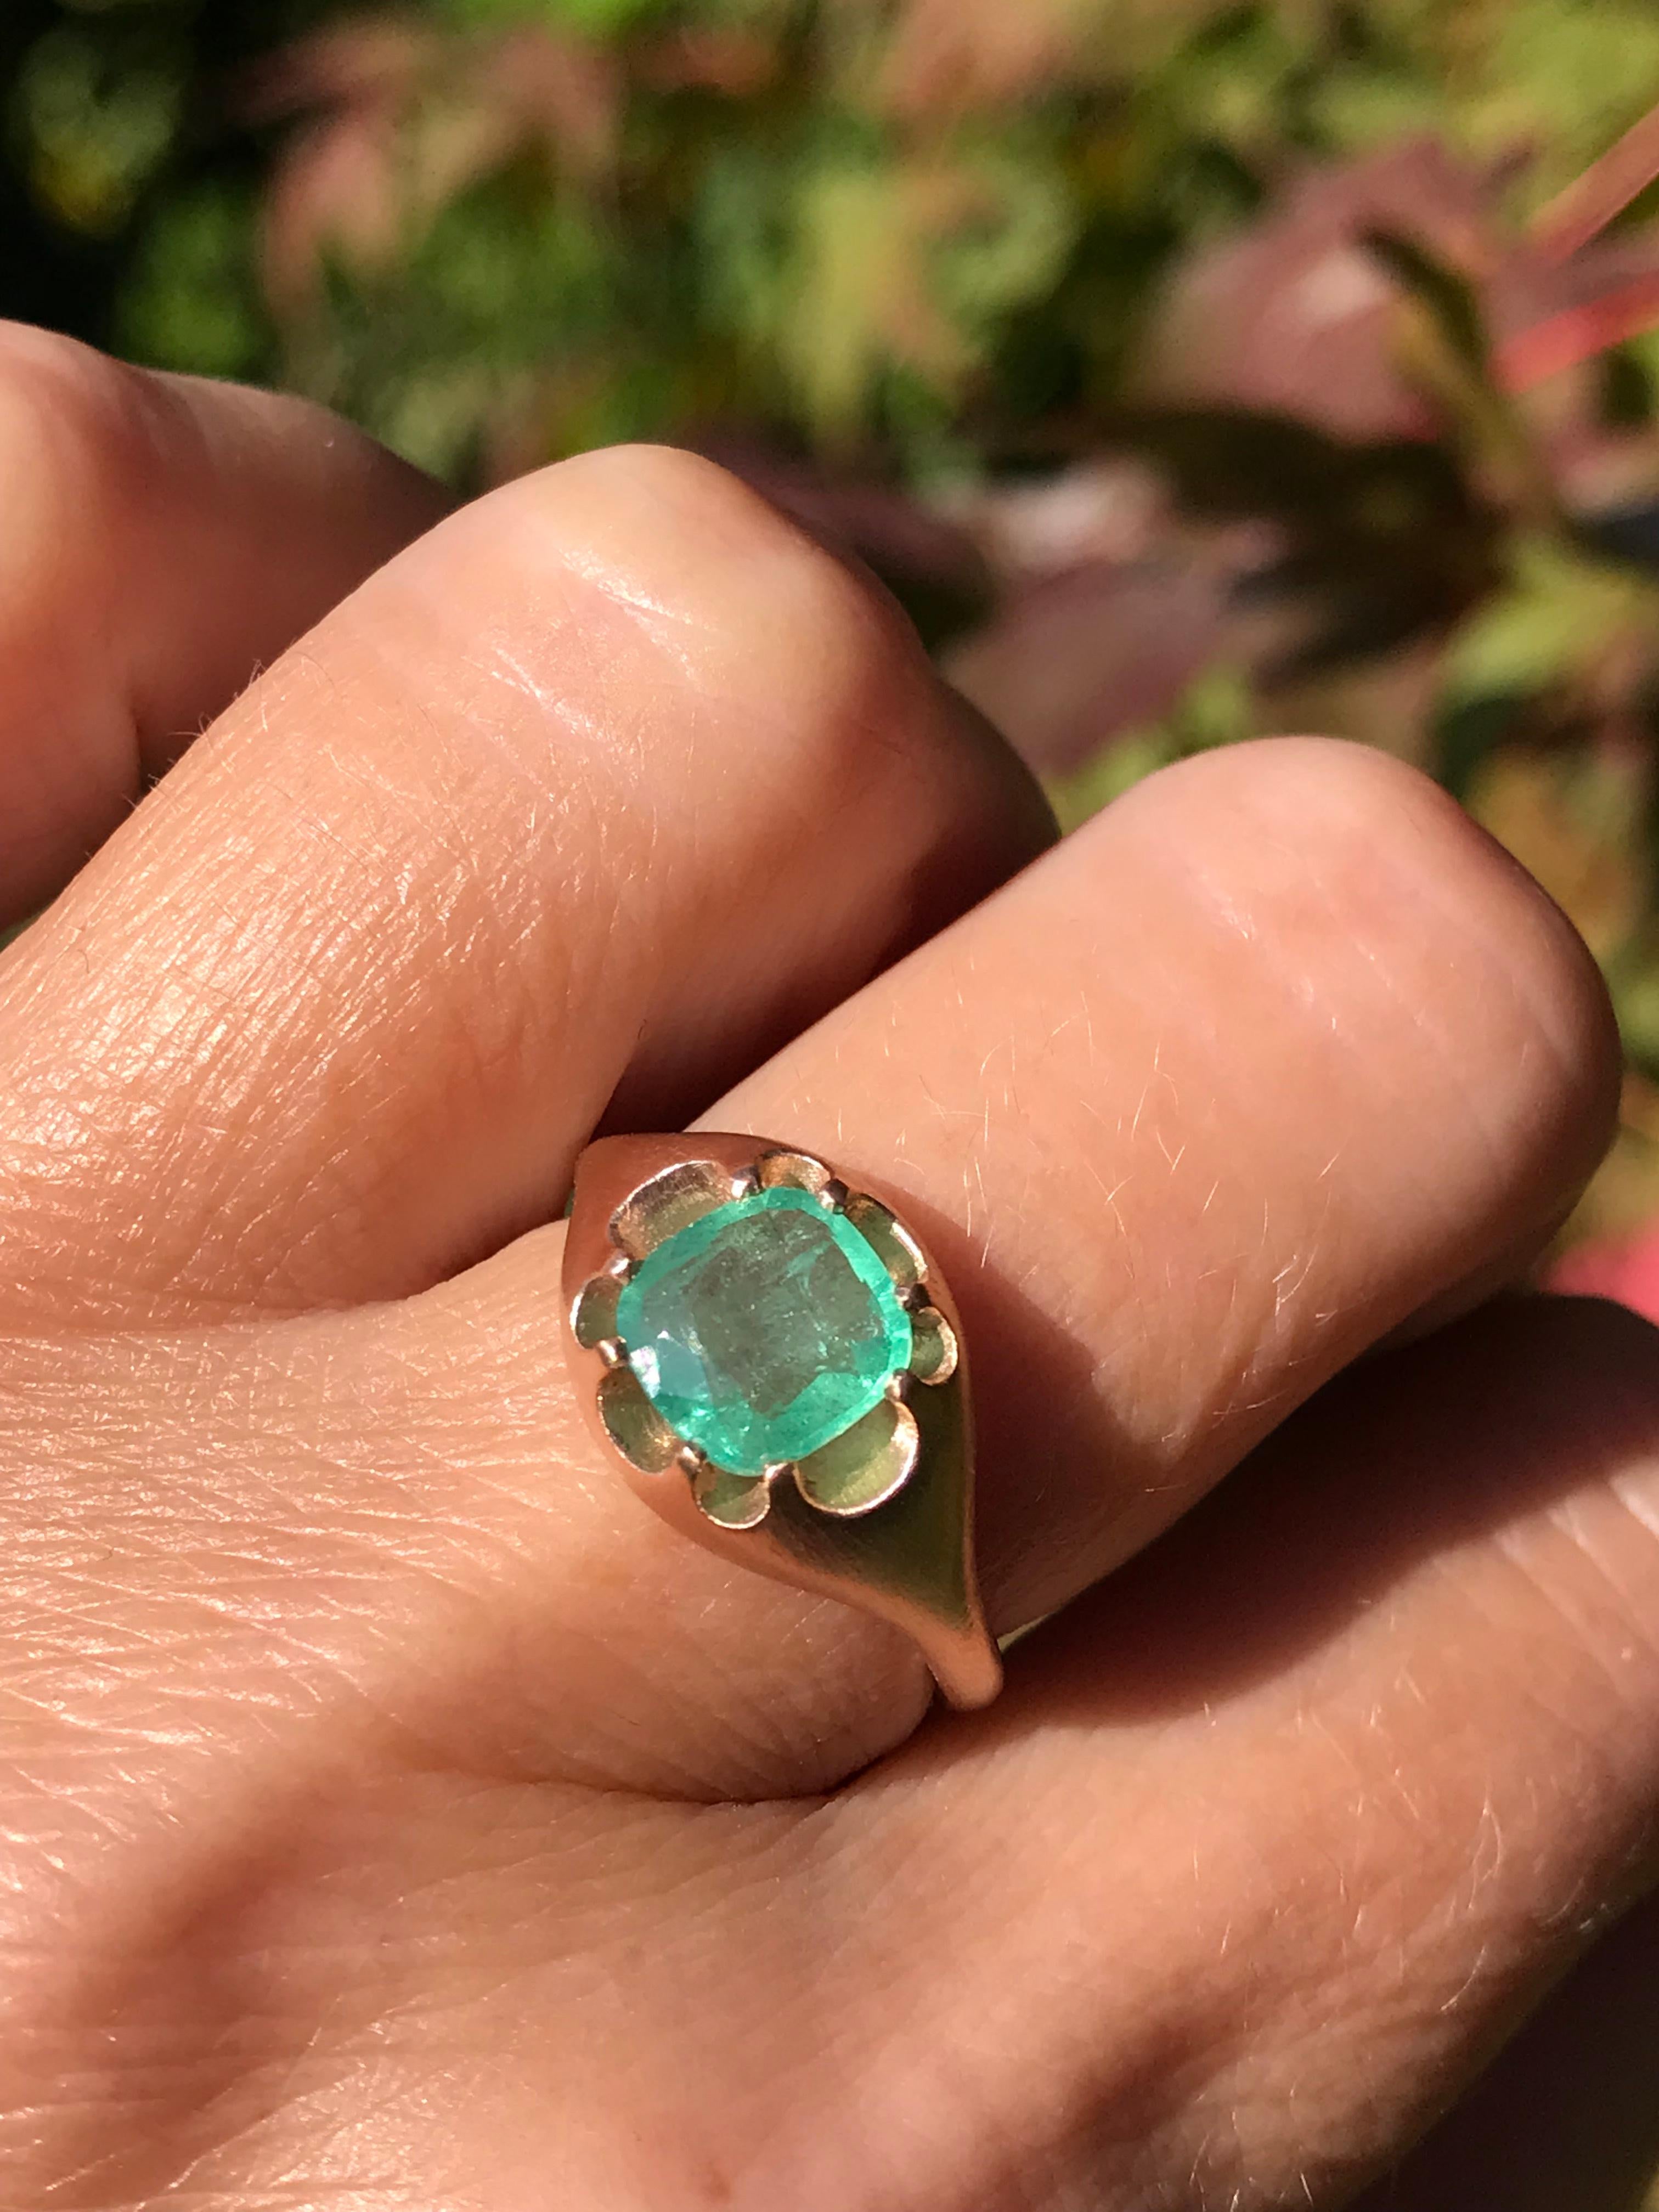 Dalben design One of a kind 18 kt rose  gold ring with a cushion cut light green emerald weight 1,26 carats  .
Ring size  US 6 3/4   -  EU 54- re-sizable .  
Bezel setting dimension:  
max width 12,9 mm,  
max height 10,4 mm. 
The ring has been